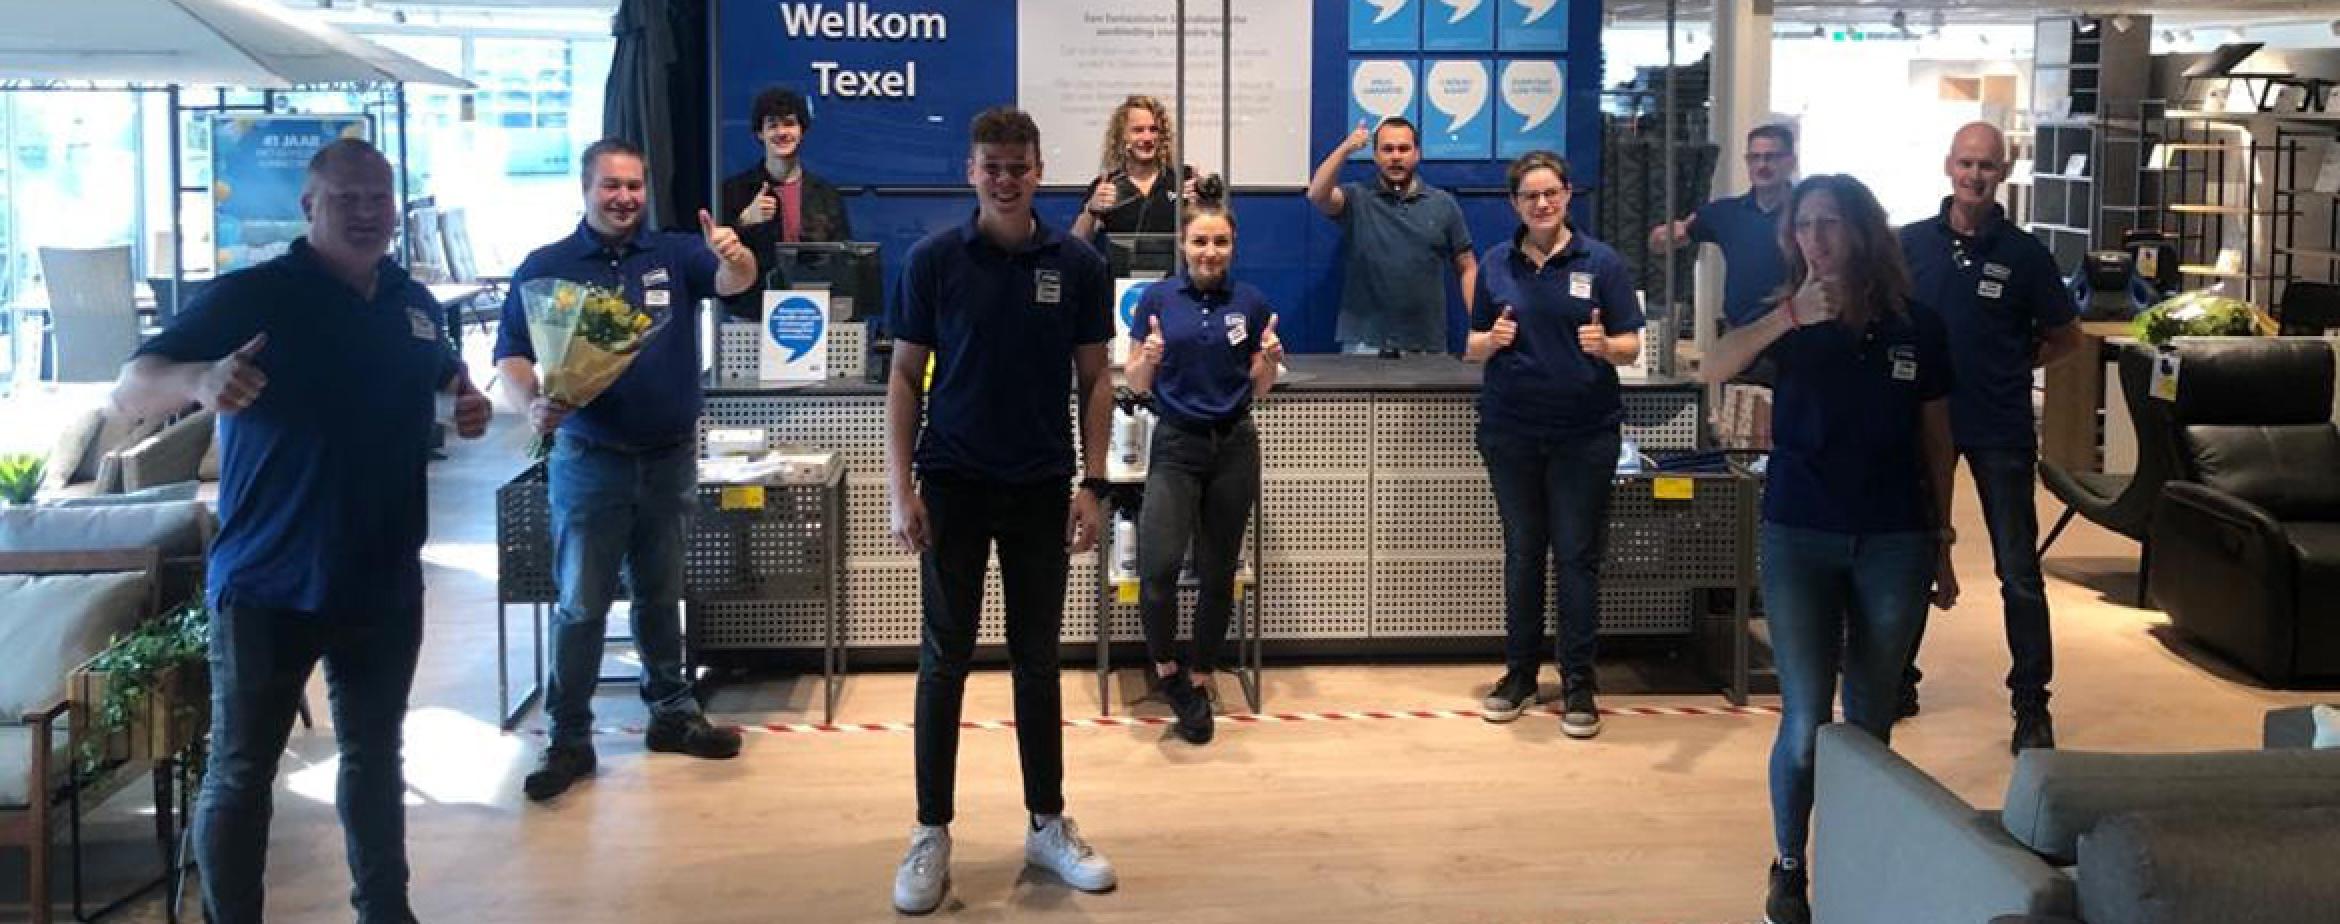 JYSK Netherlands celebrated 100 stores with a silent opening